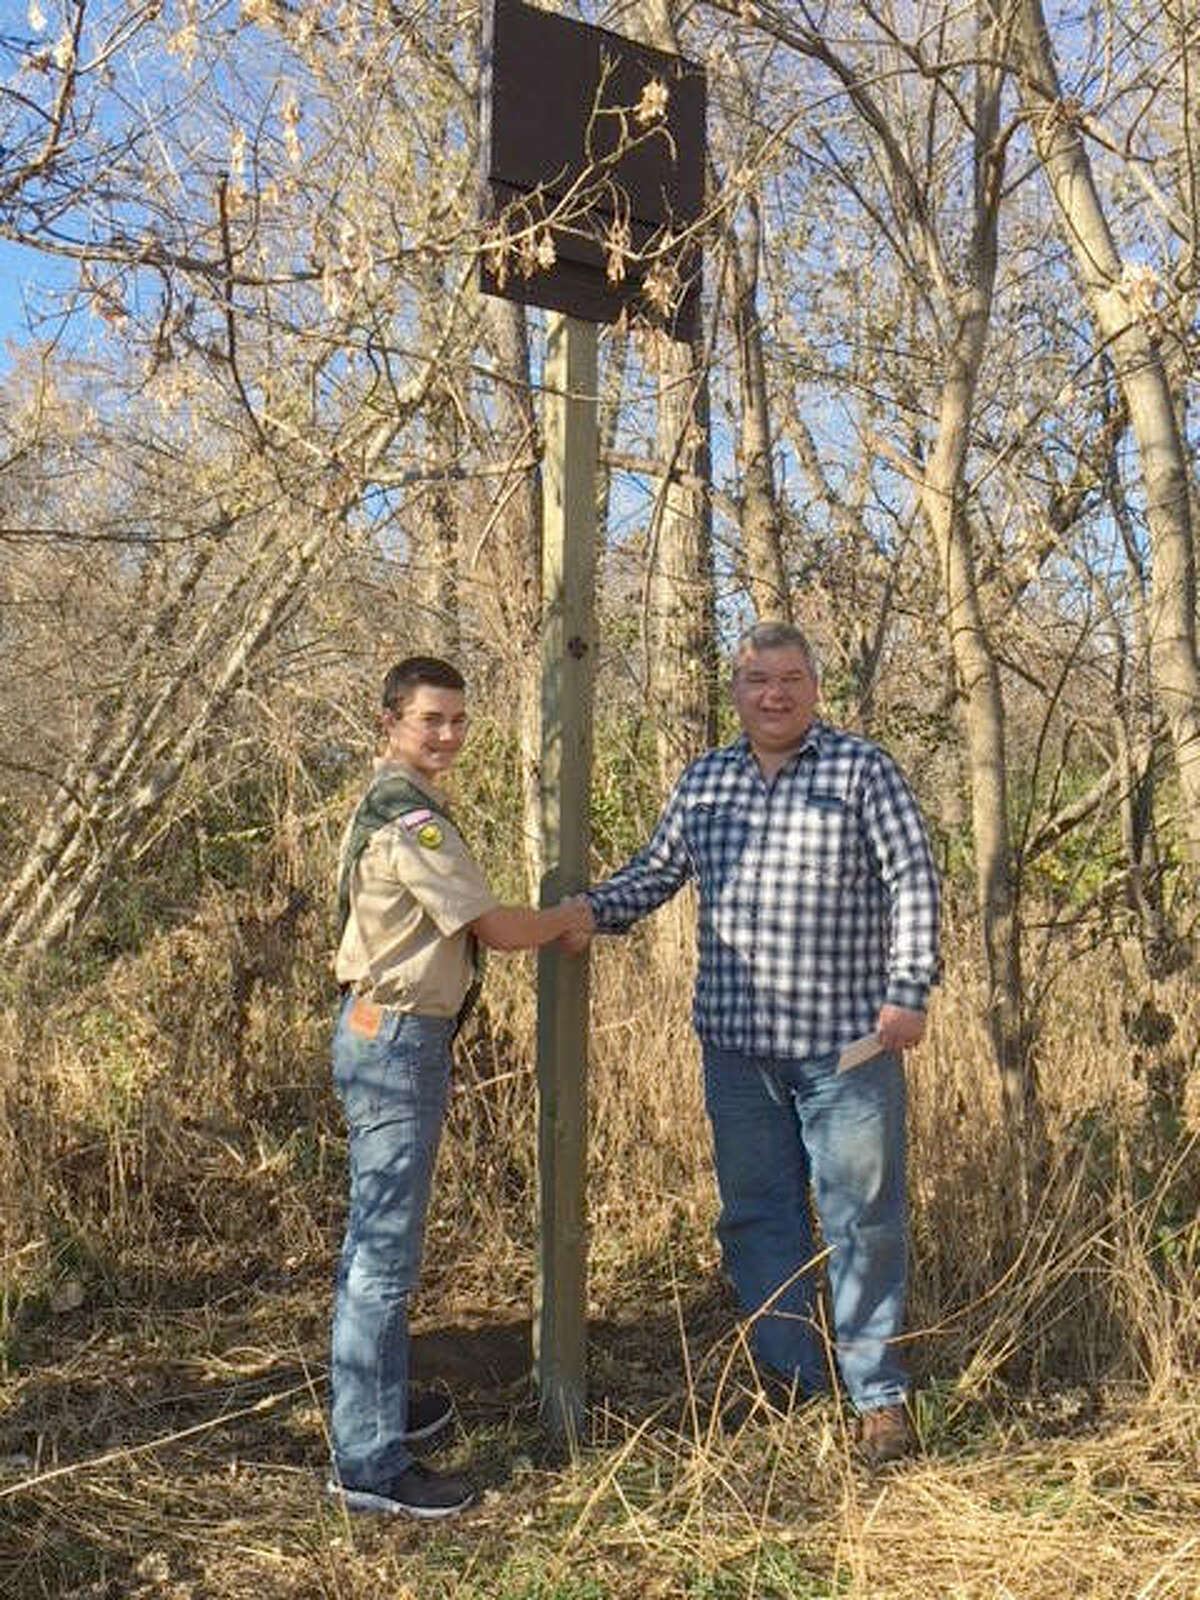 Bethalto Mayor Alan Winslow shakes the hand of local Boy Scout Ethan Scott, who recently installed three new bat houses at the Bethalto Sports Complex as part of his Eagle Scout project.